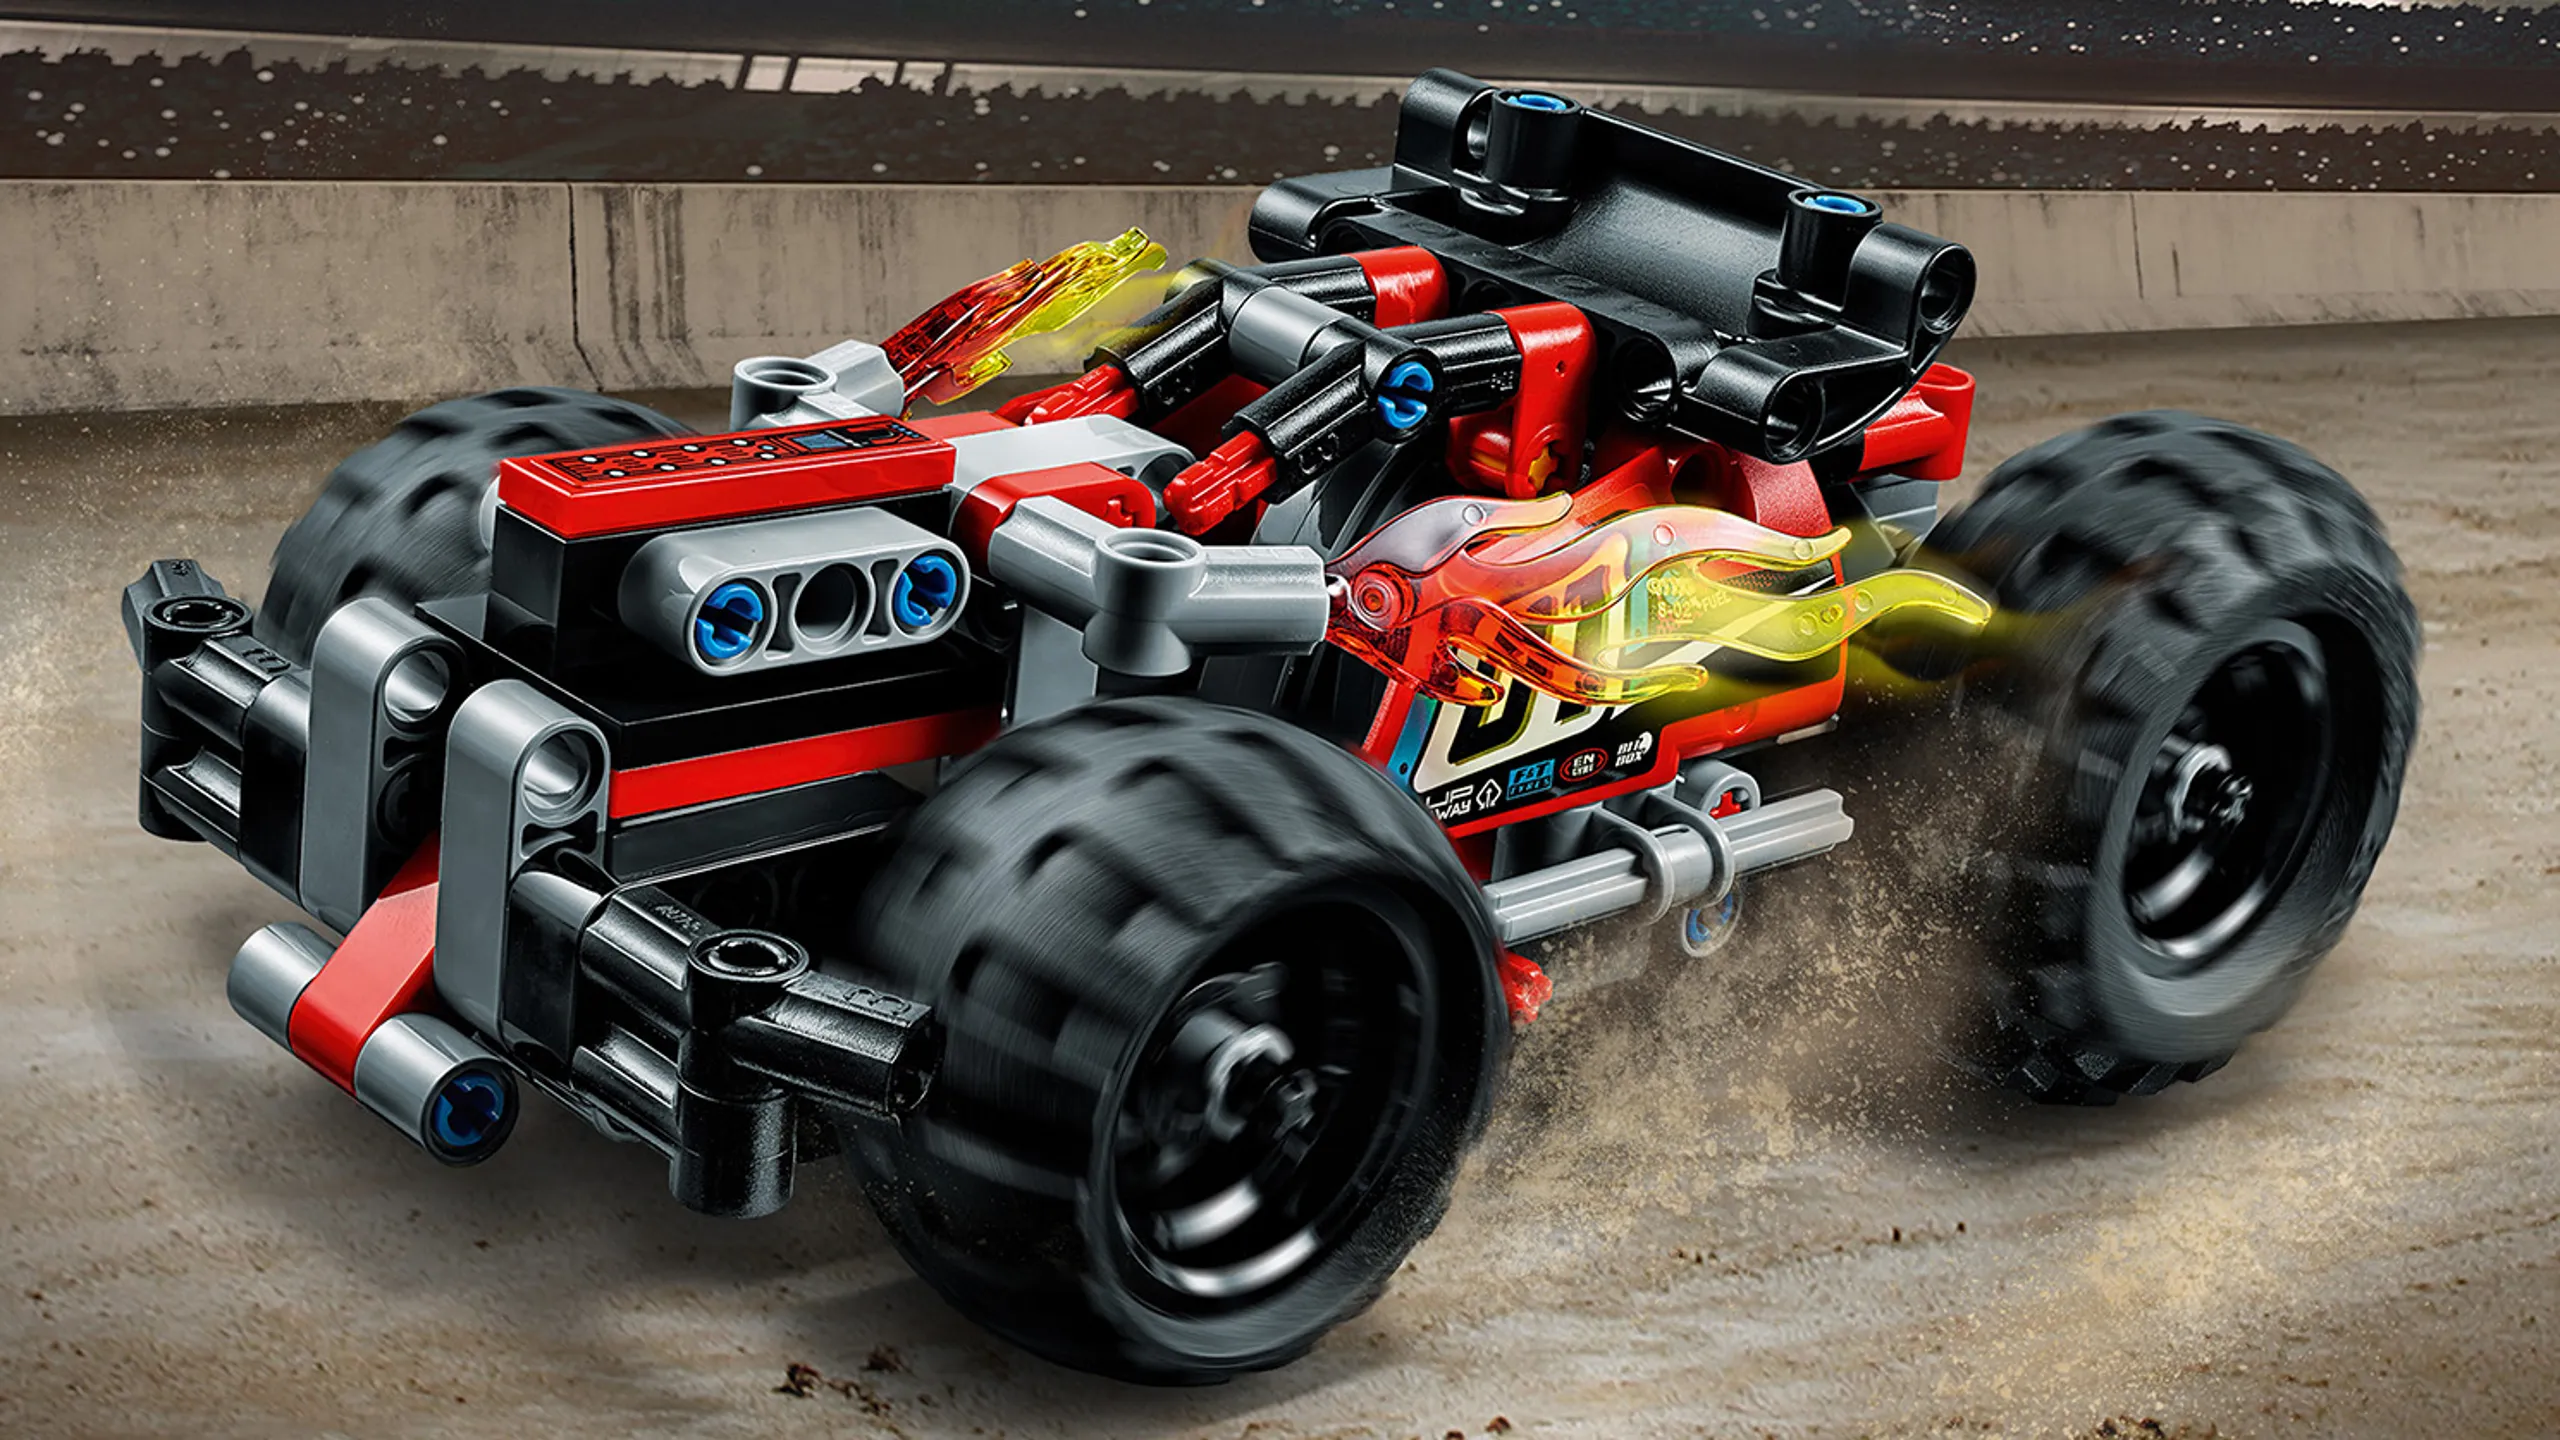 LEGO Technic - 42073 BASH! - Power up this rugged vehicle with pull-back motor featuring red, black and gray colors with racing stickers, heavy-duty front bumper, large rear spoiler and huge chunky tires.